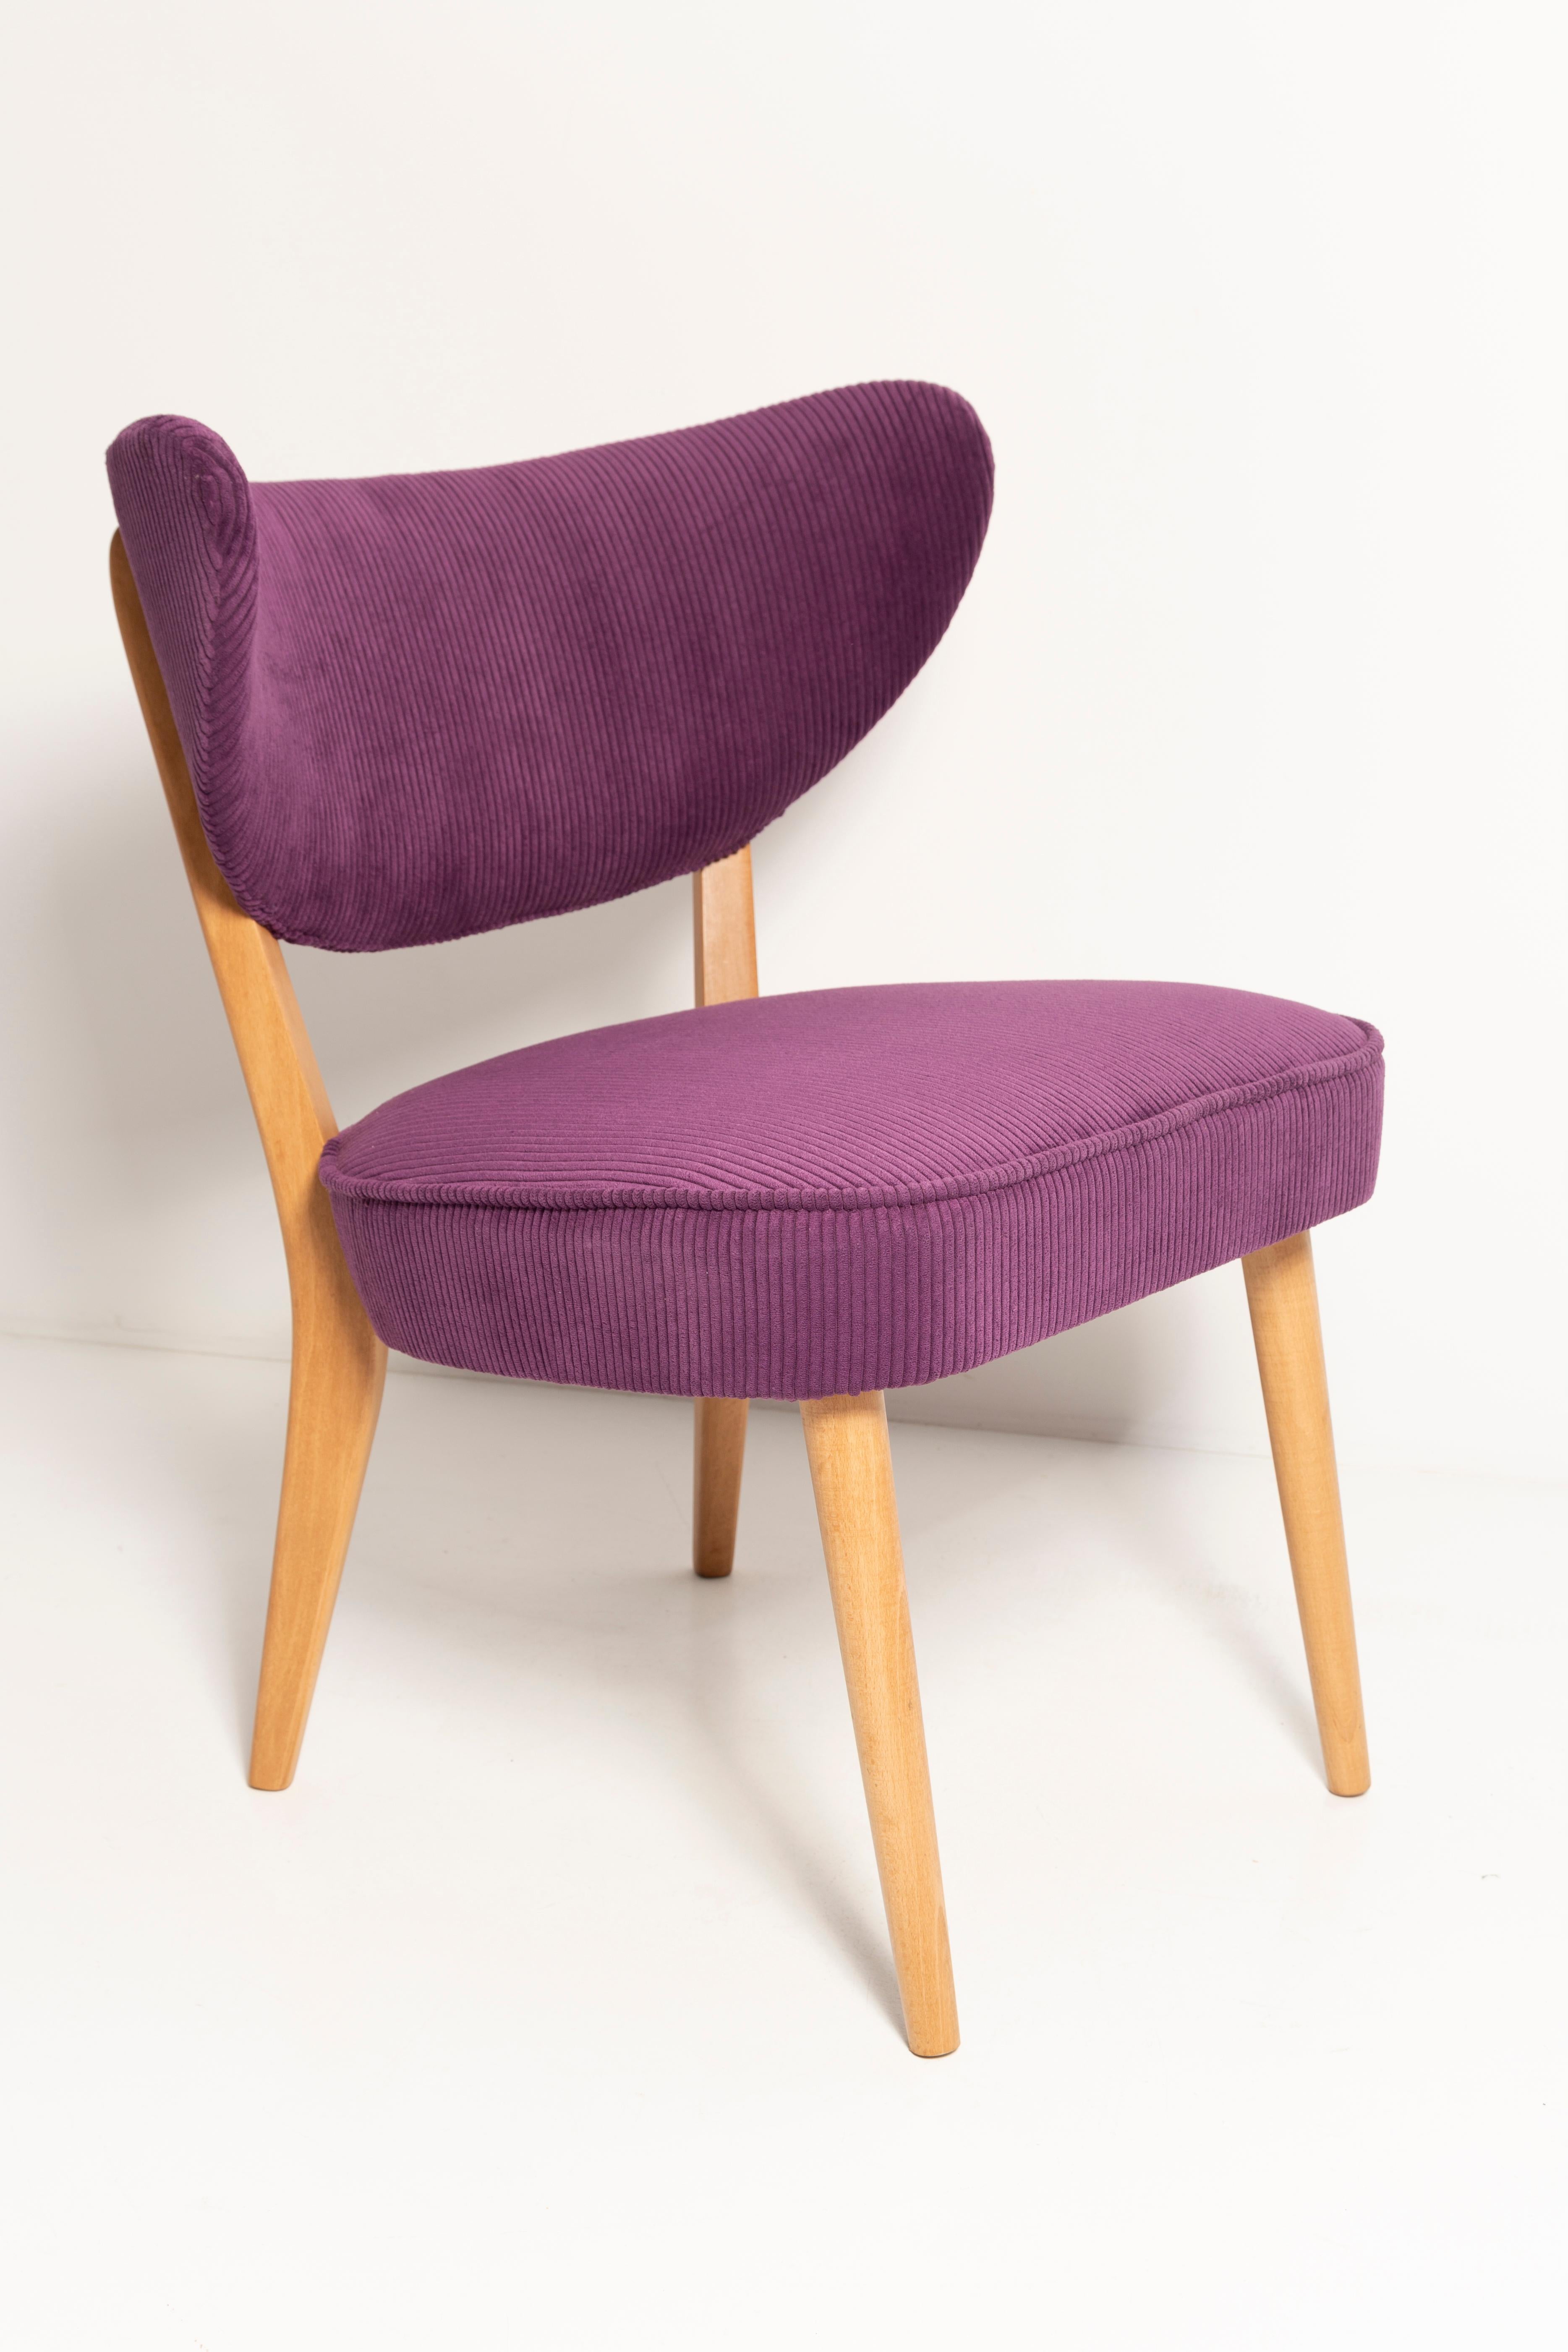 Polish Pair of Midcentury Style Violet Velvet Club Chairs, by Vintola Studio, Europe For Sale